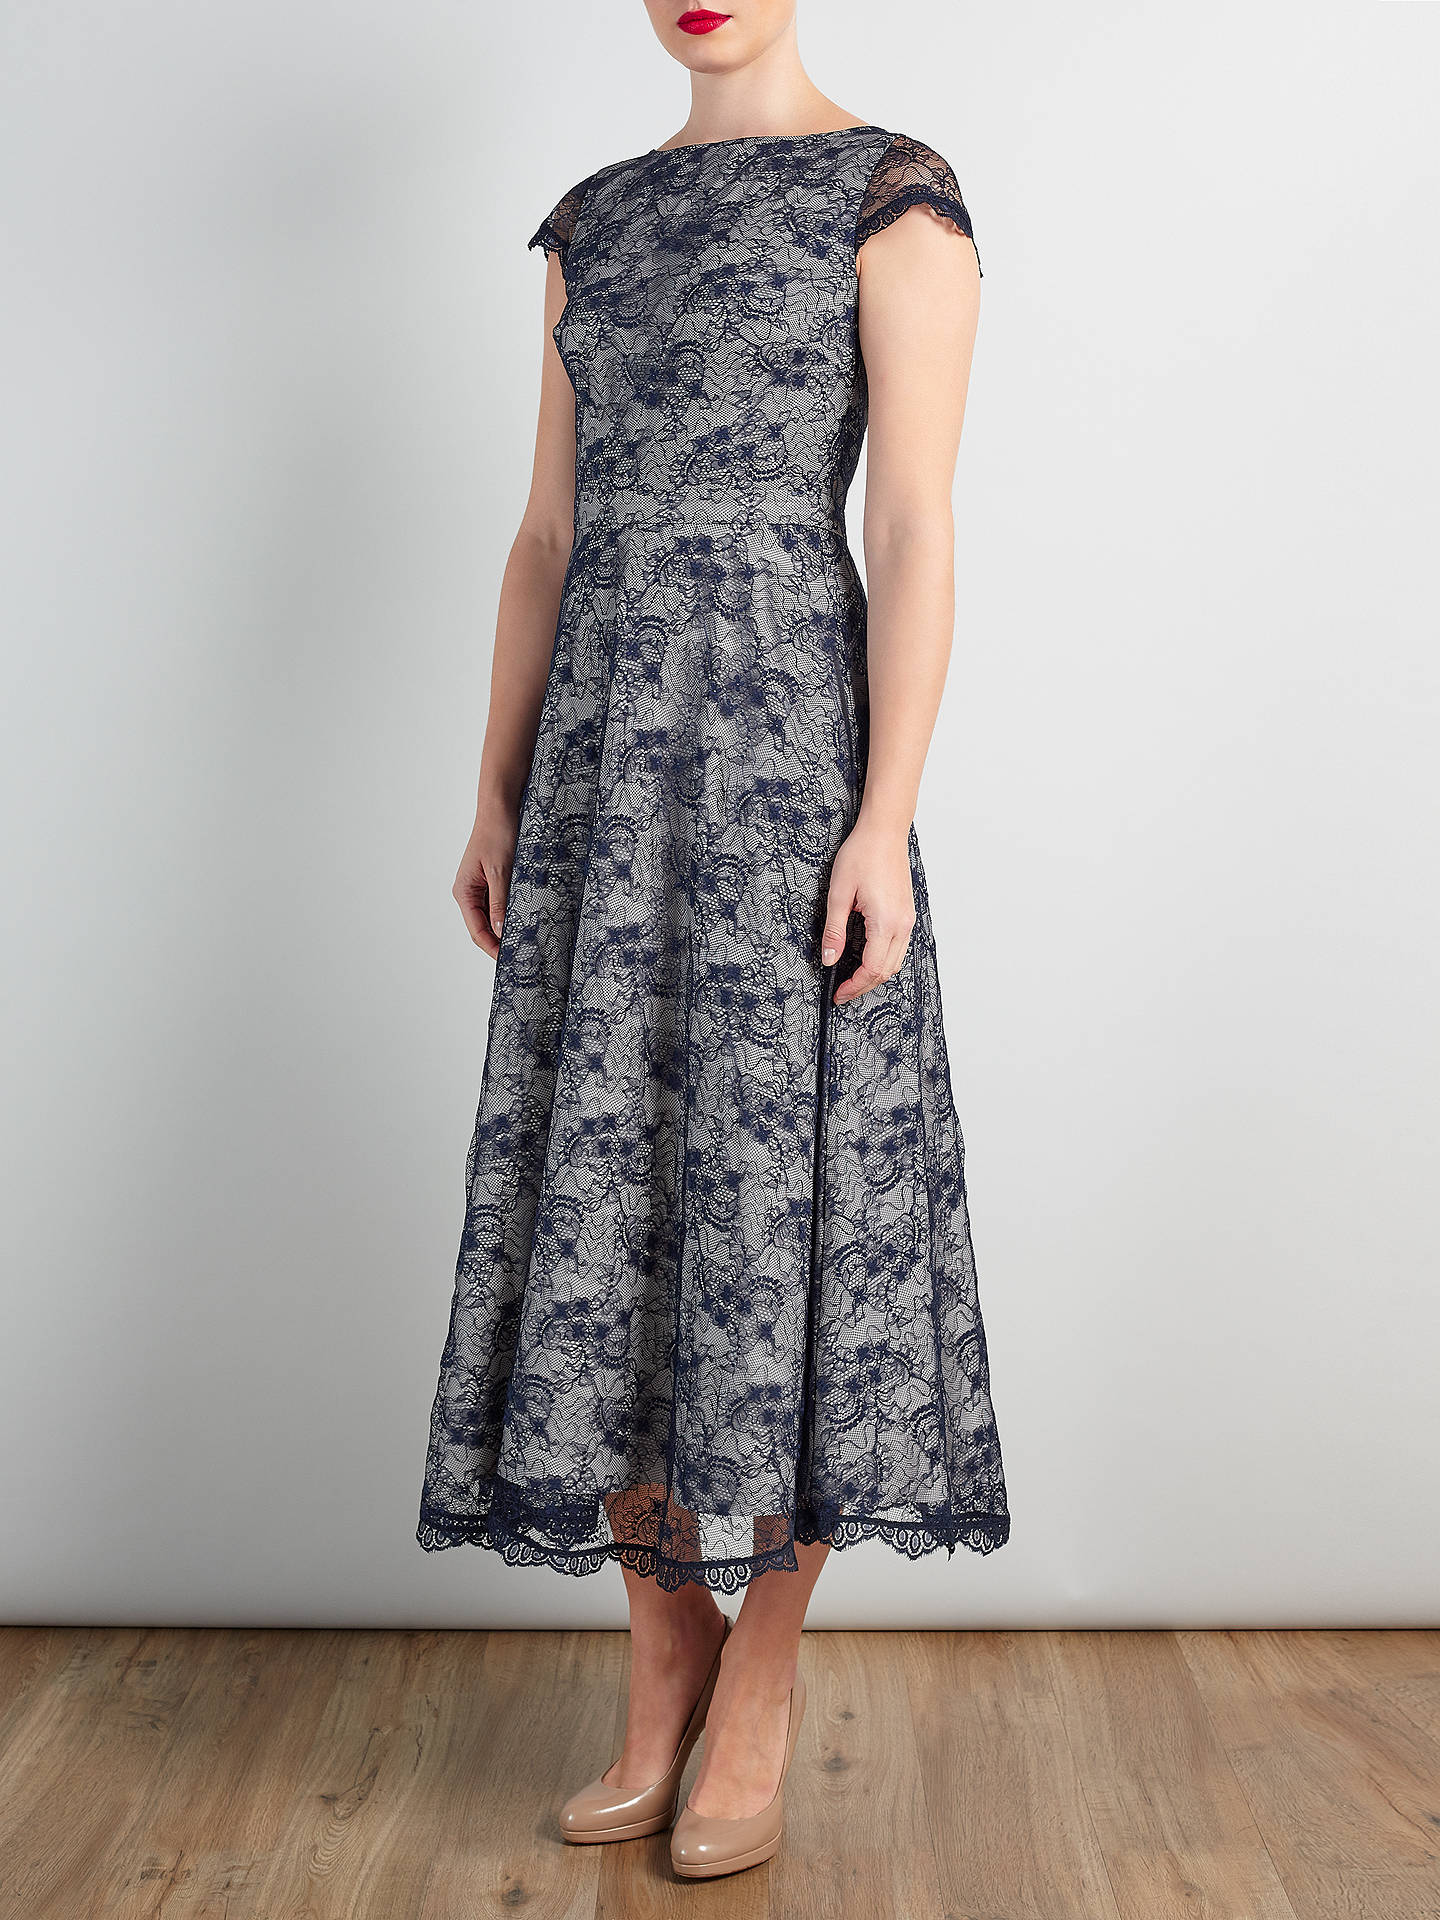 Bruce by Bruce Oldfield Lace Dress, Navy at John Lewis & Partners